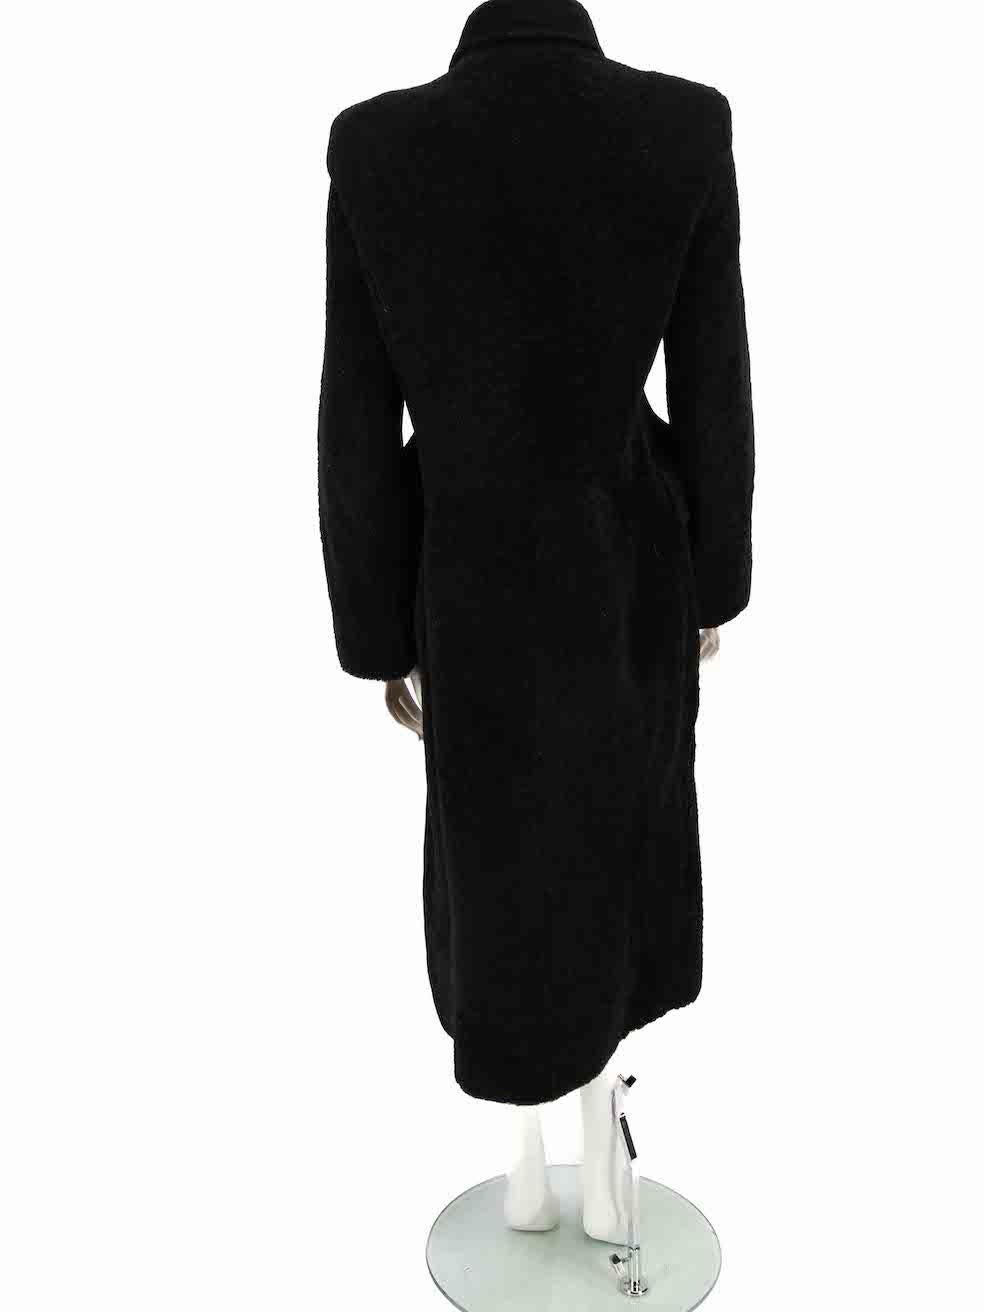 Balenciaga Black Lamb Shearling Hourglass Coat Size L In Good Condition For Sale In London, GB